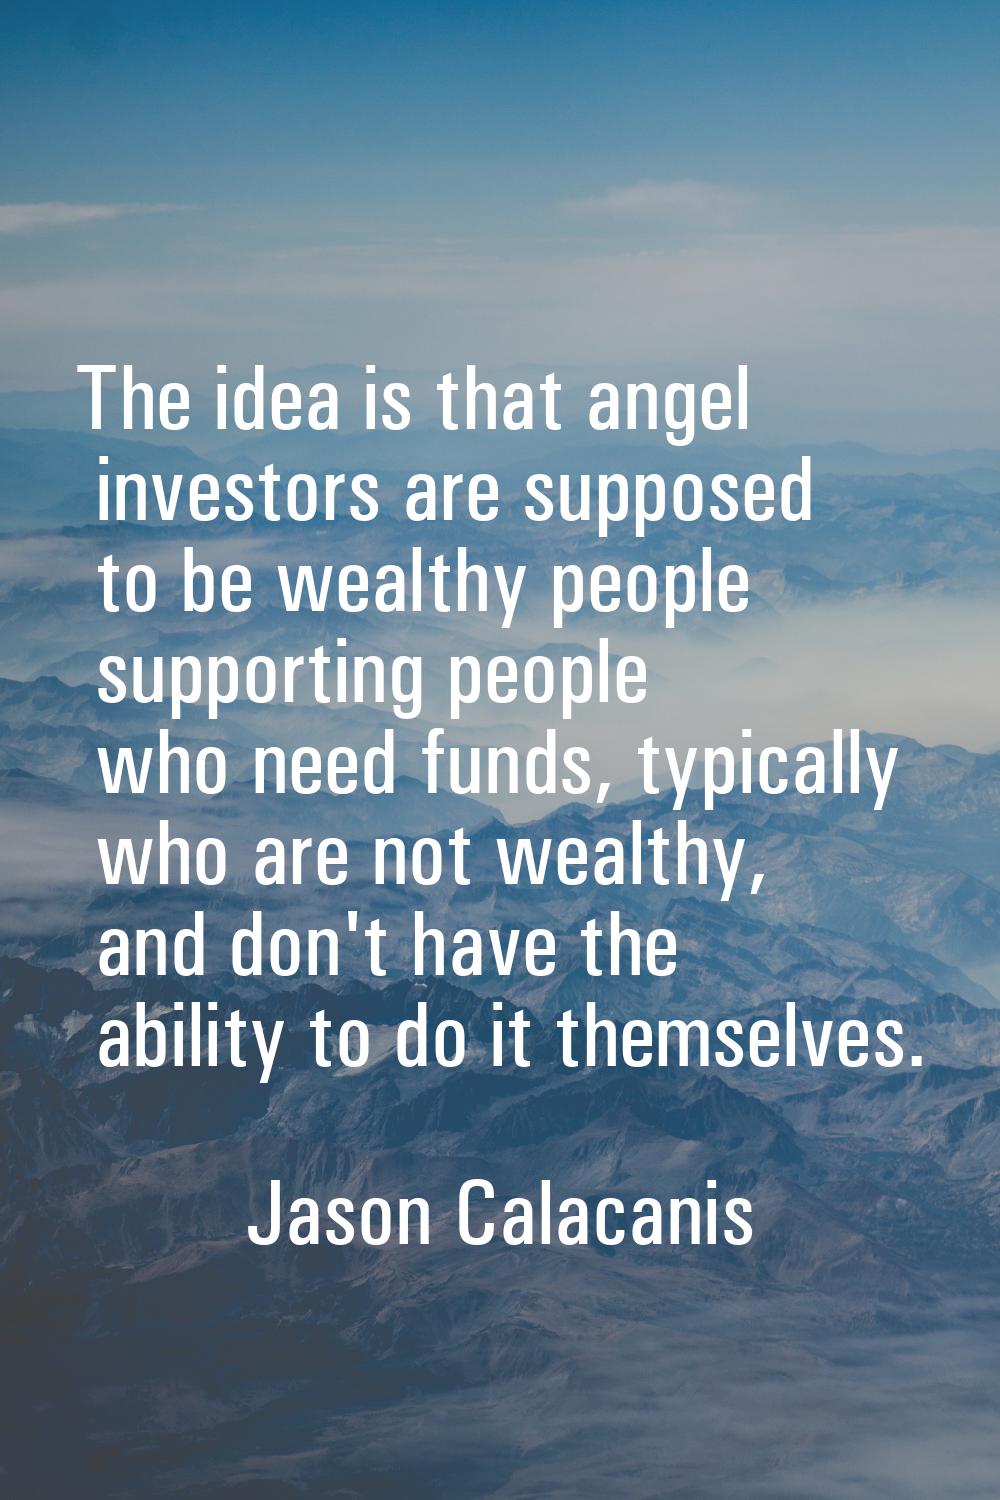 The idea is that angel investors are supposed to be wealthy people supporting people who need funds